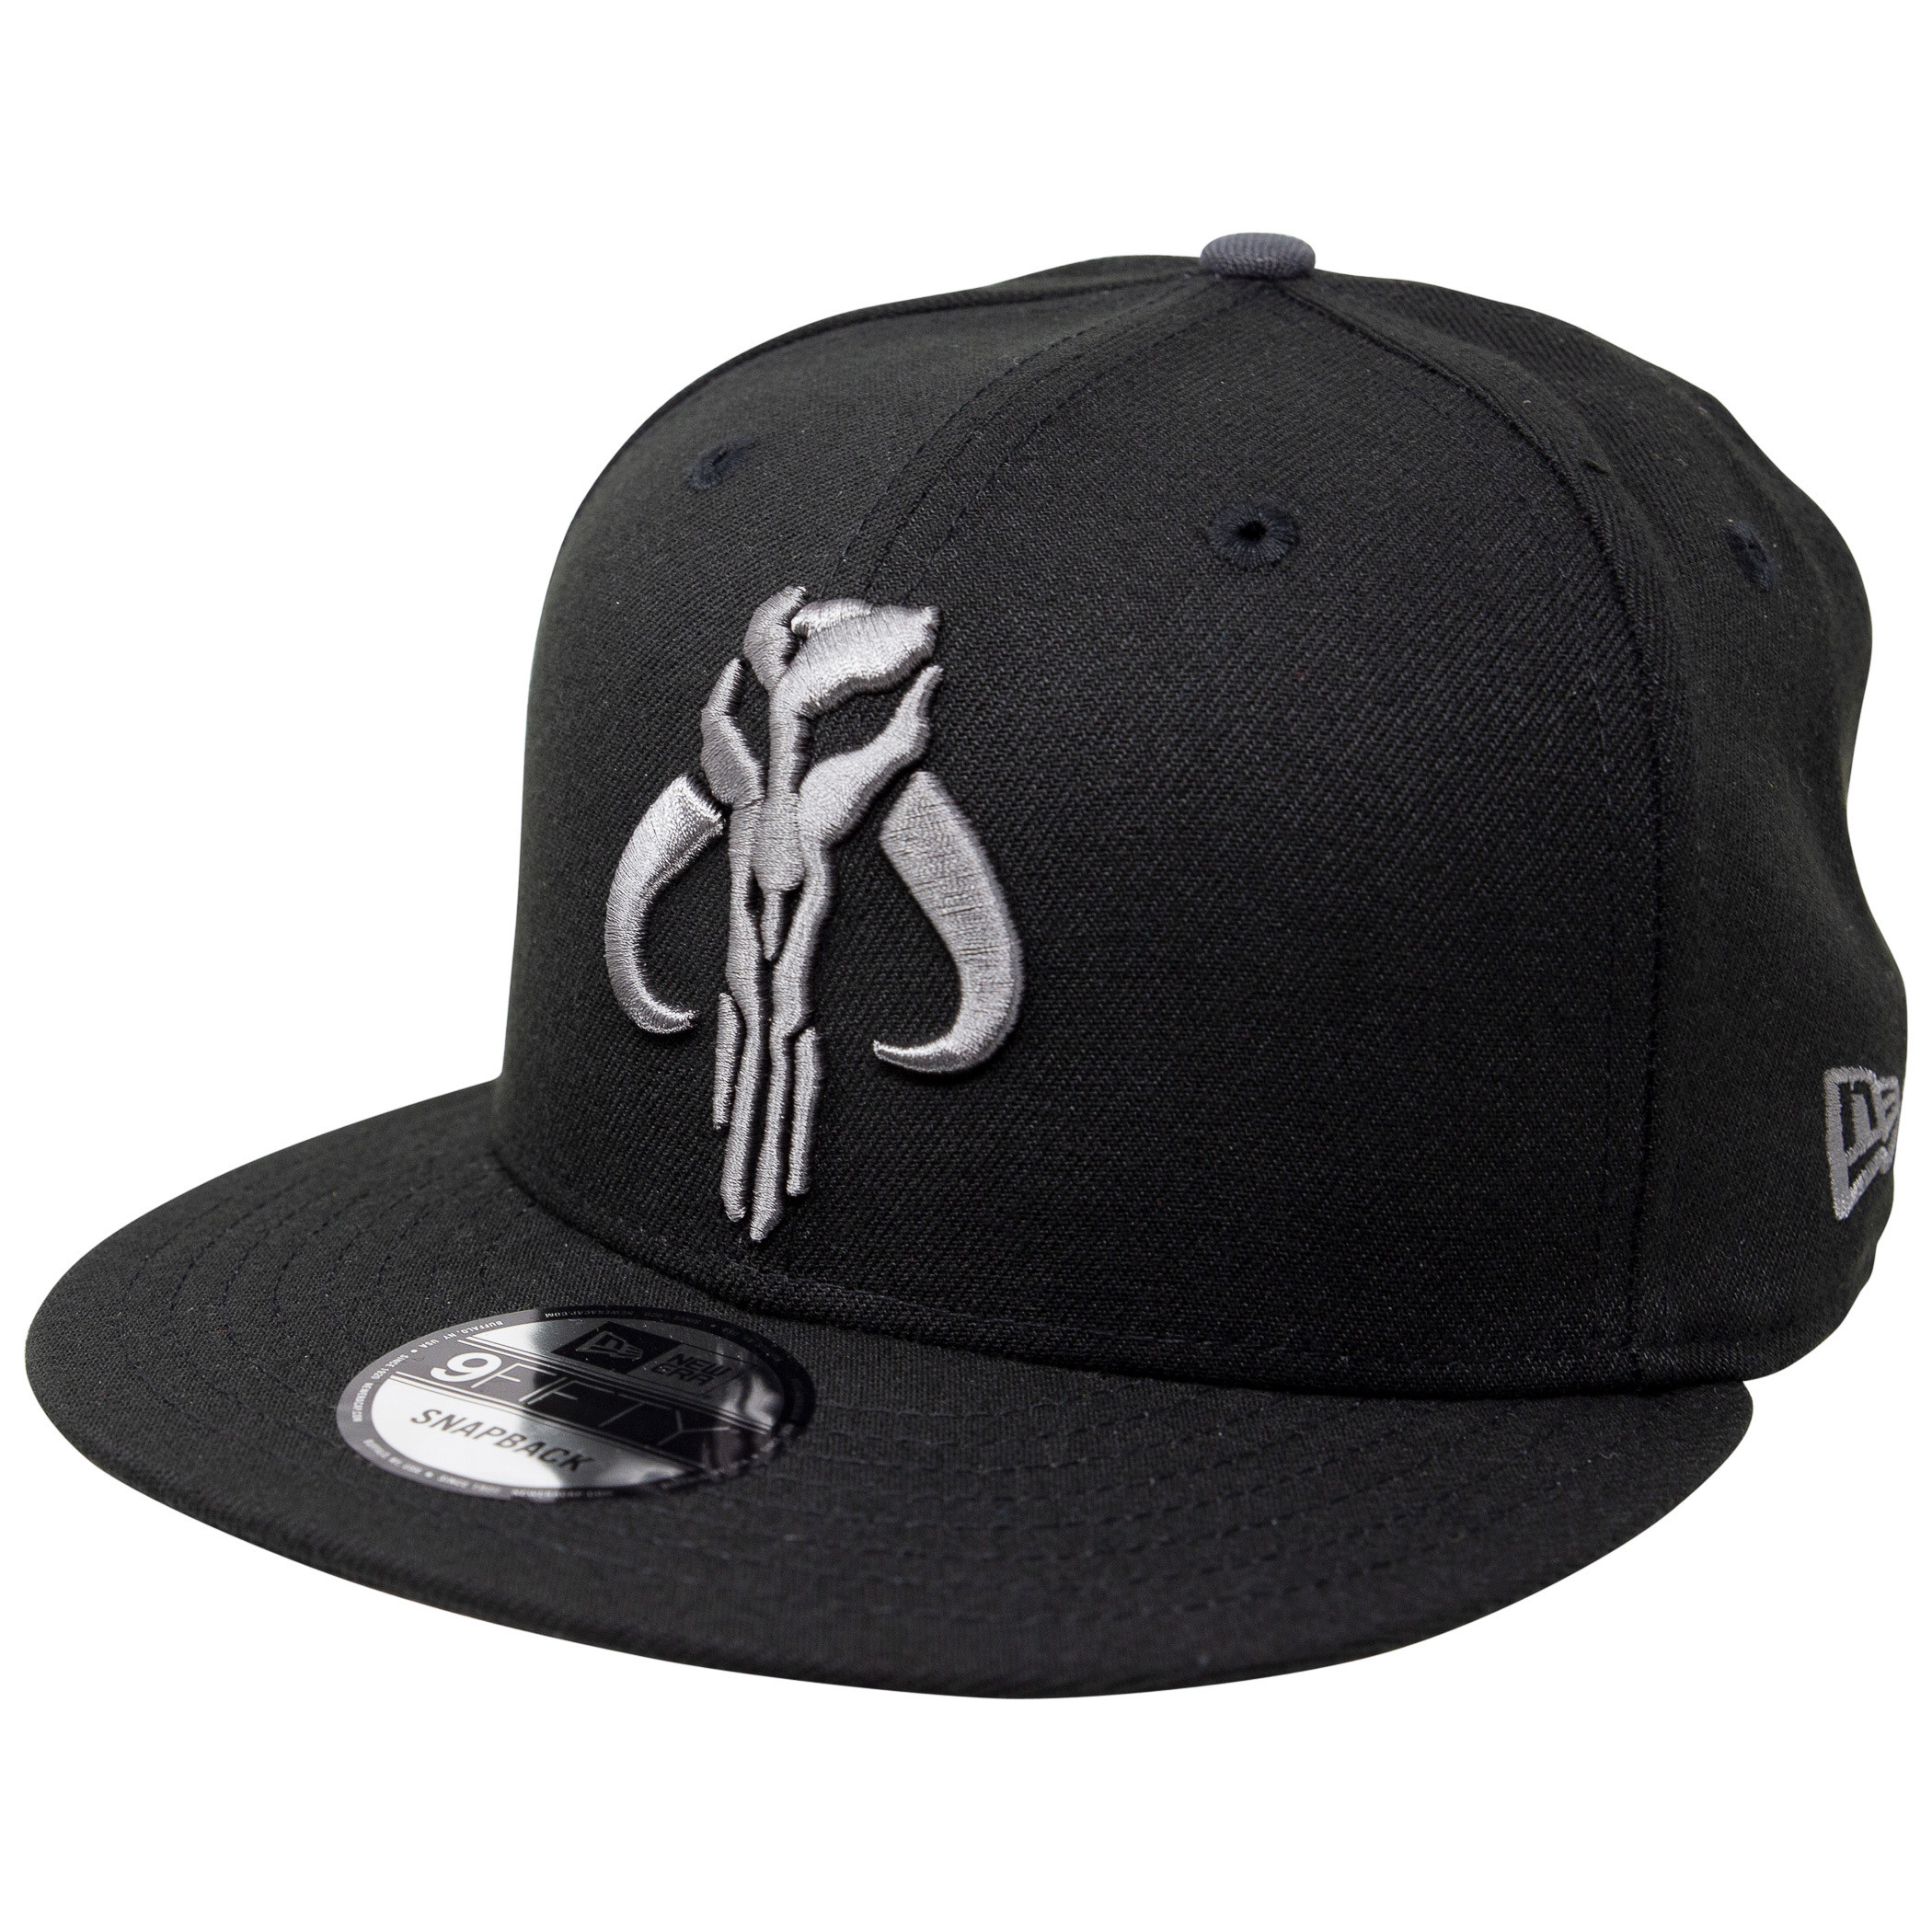 New Era Star Wars The Mandalorian 39Thirty Fitted Hat